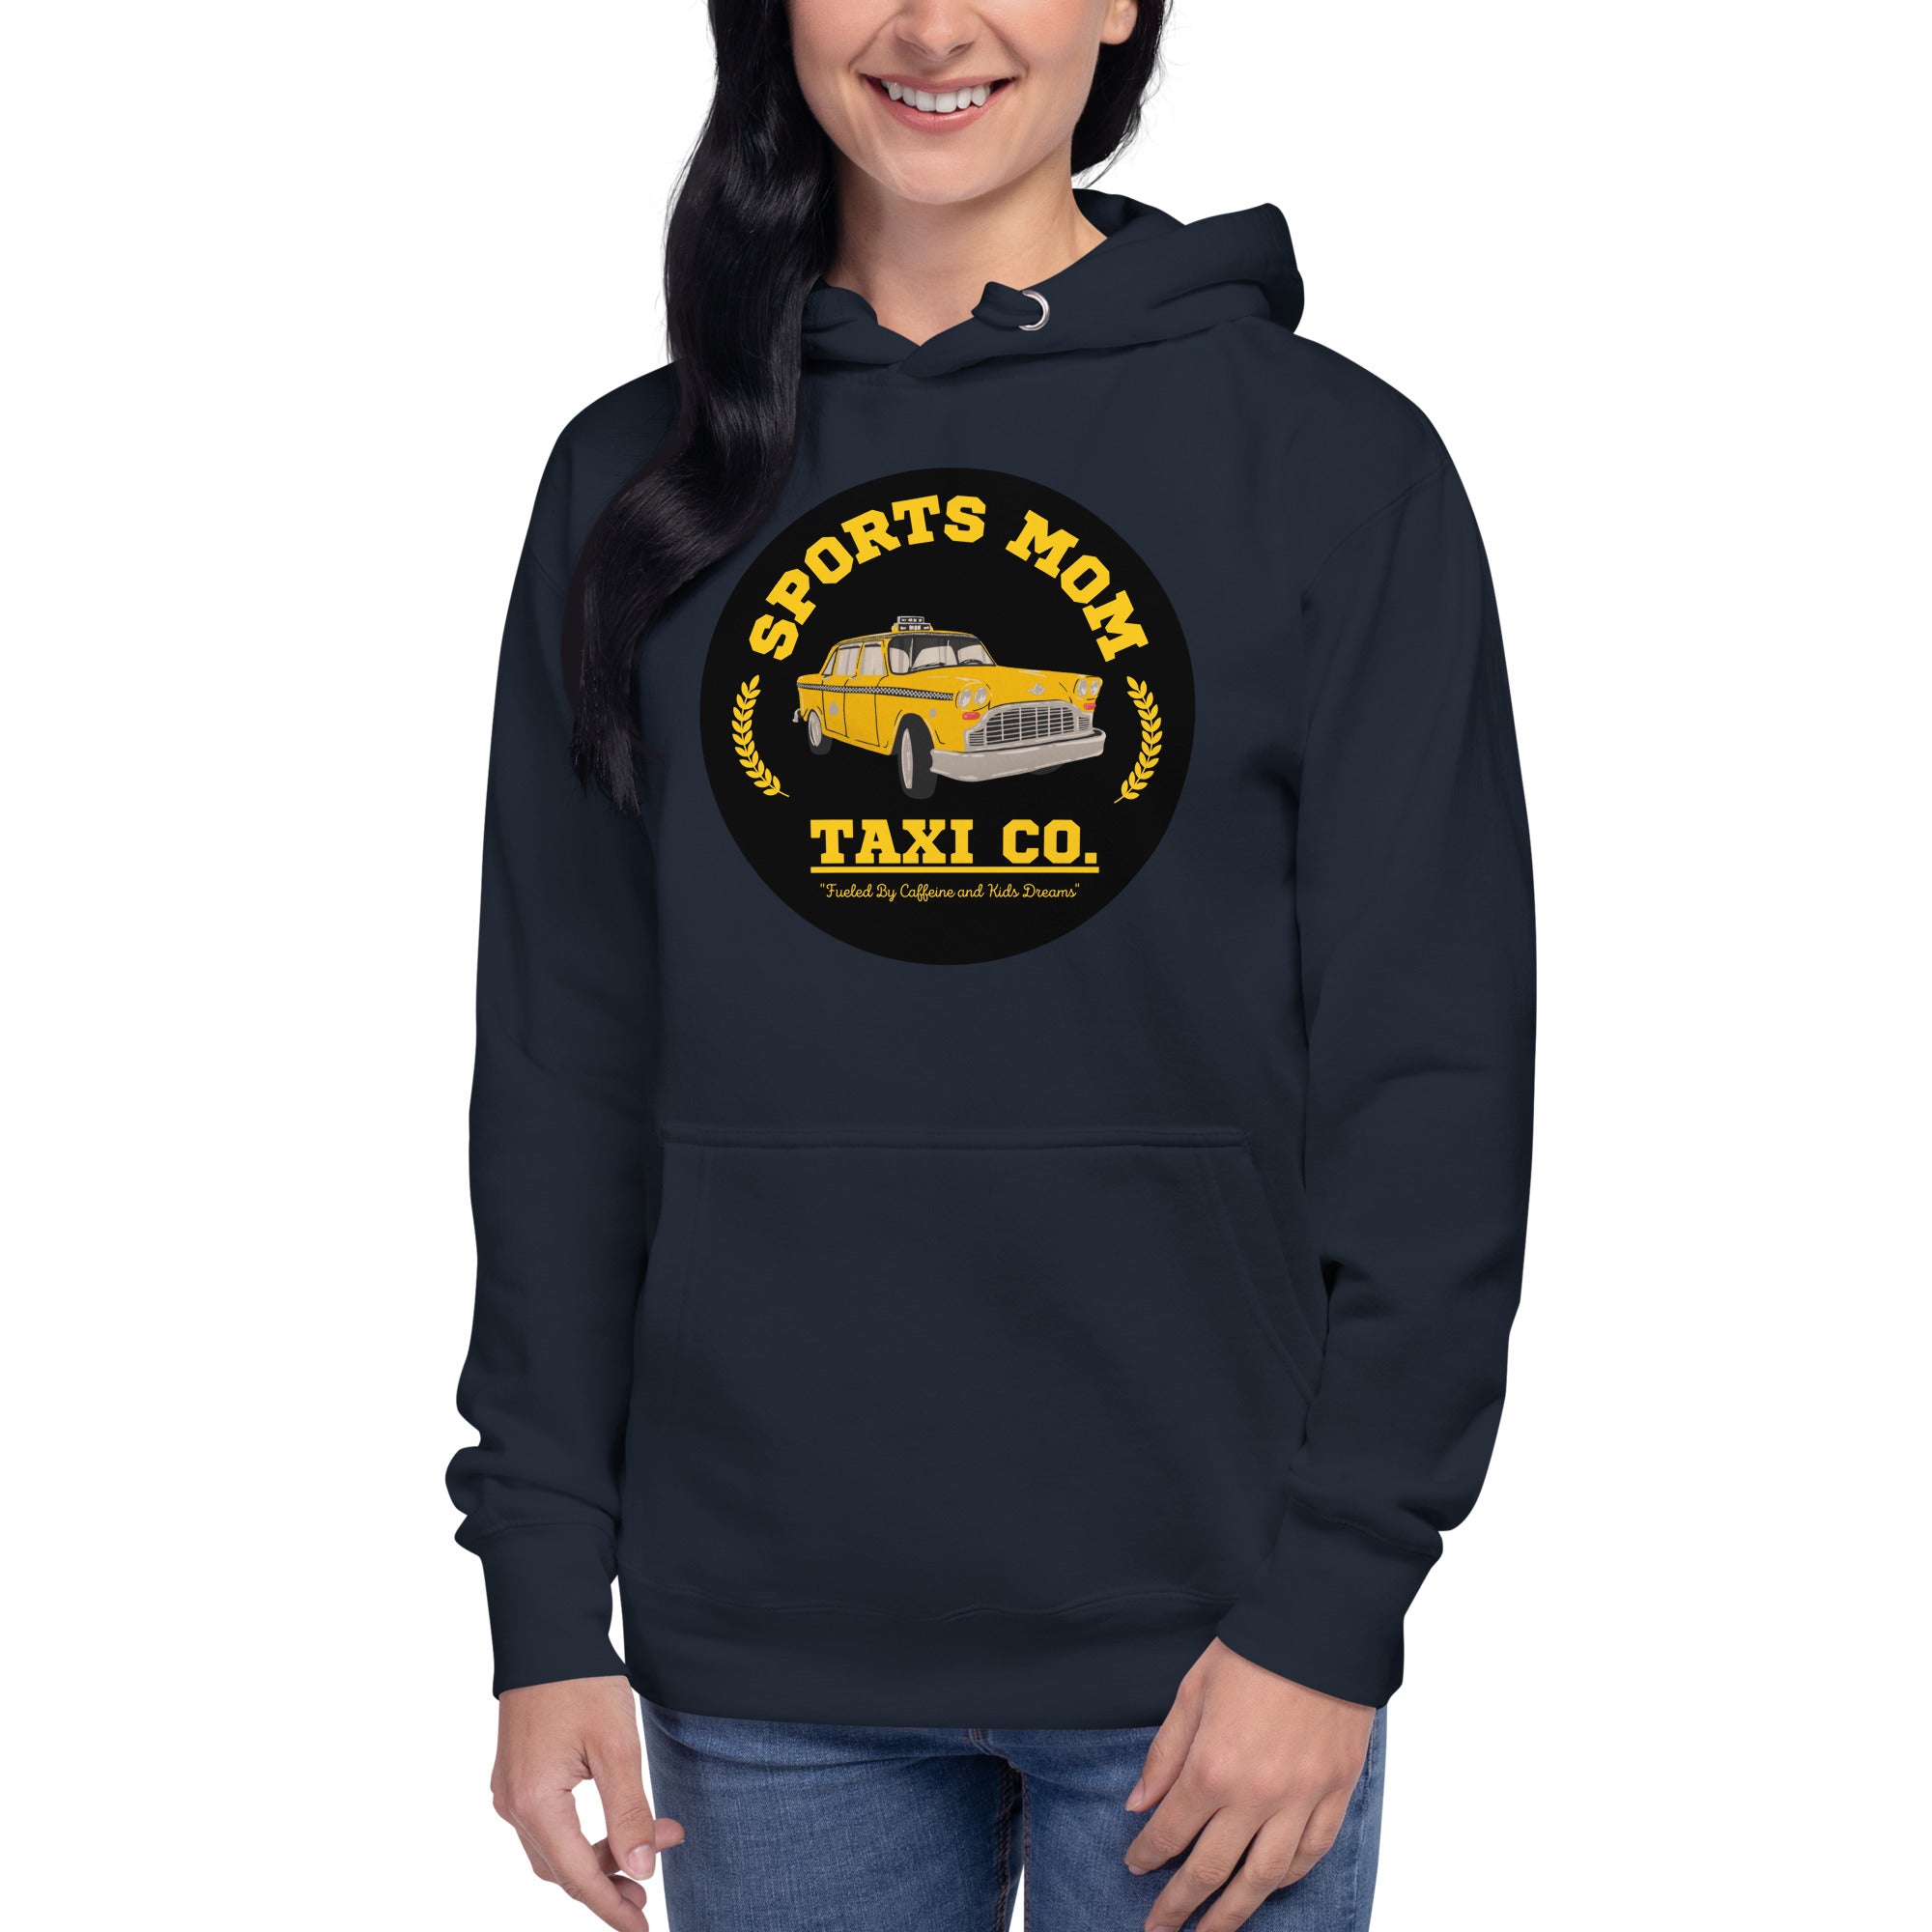 The Sports Mom Taxi Co. Original Heavy Hoodie